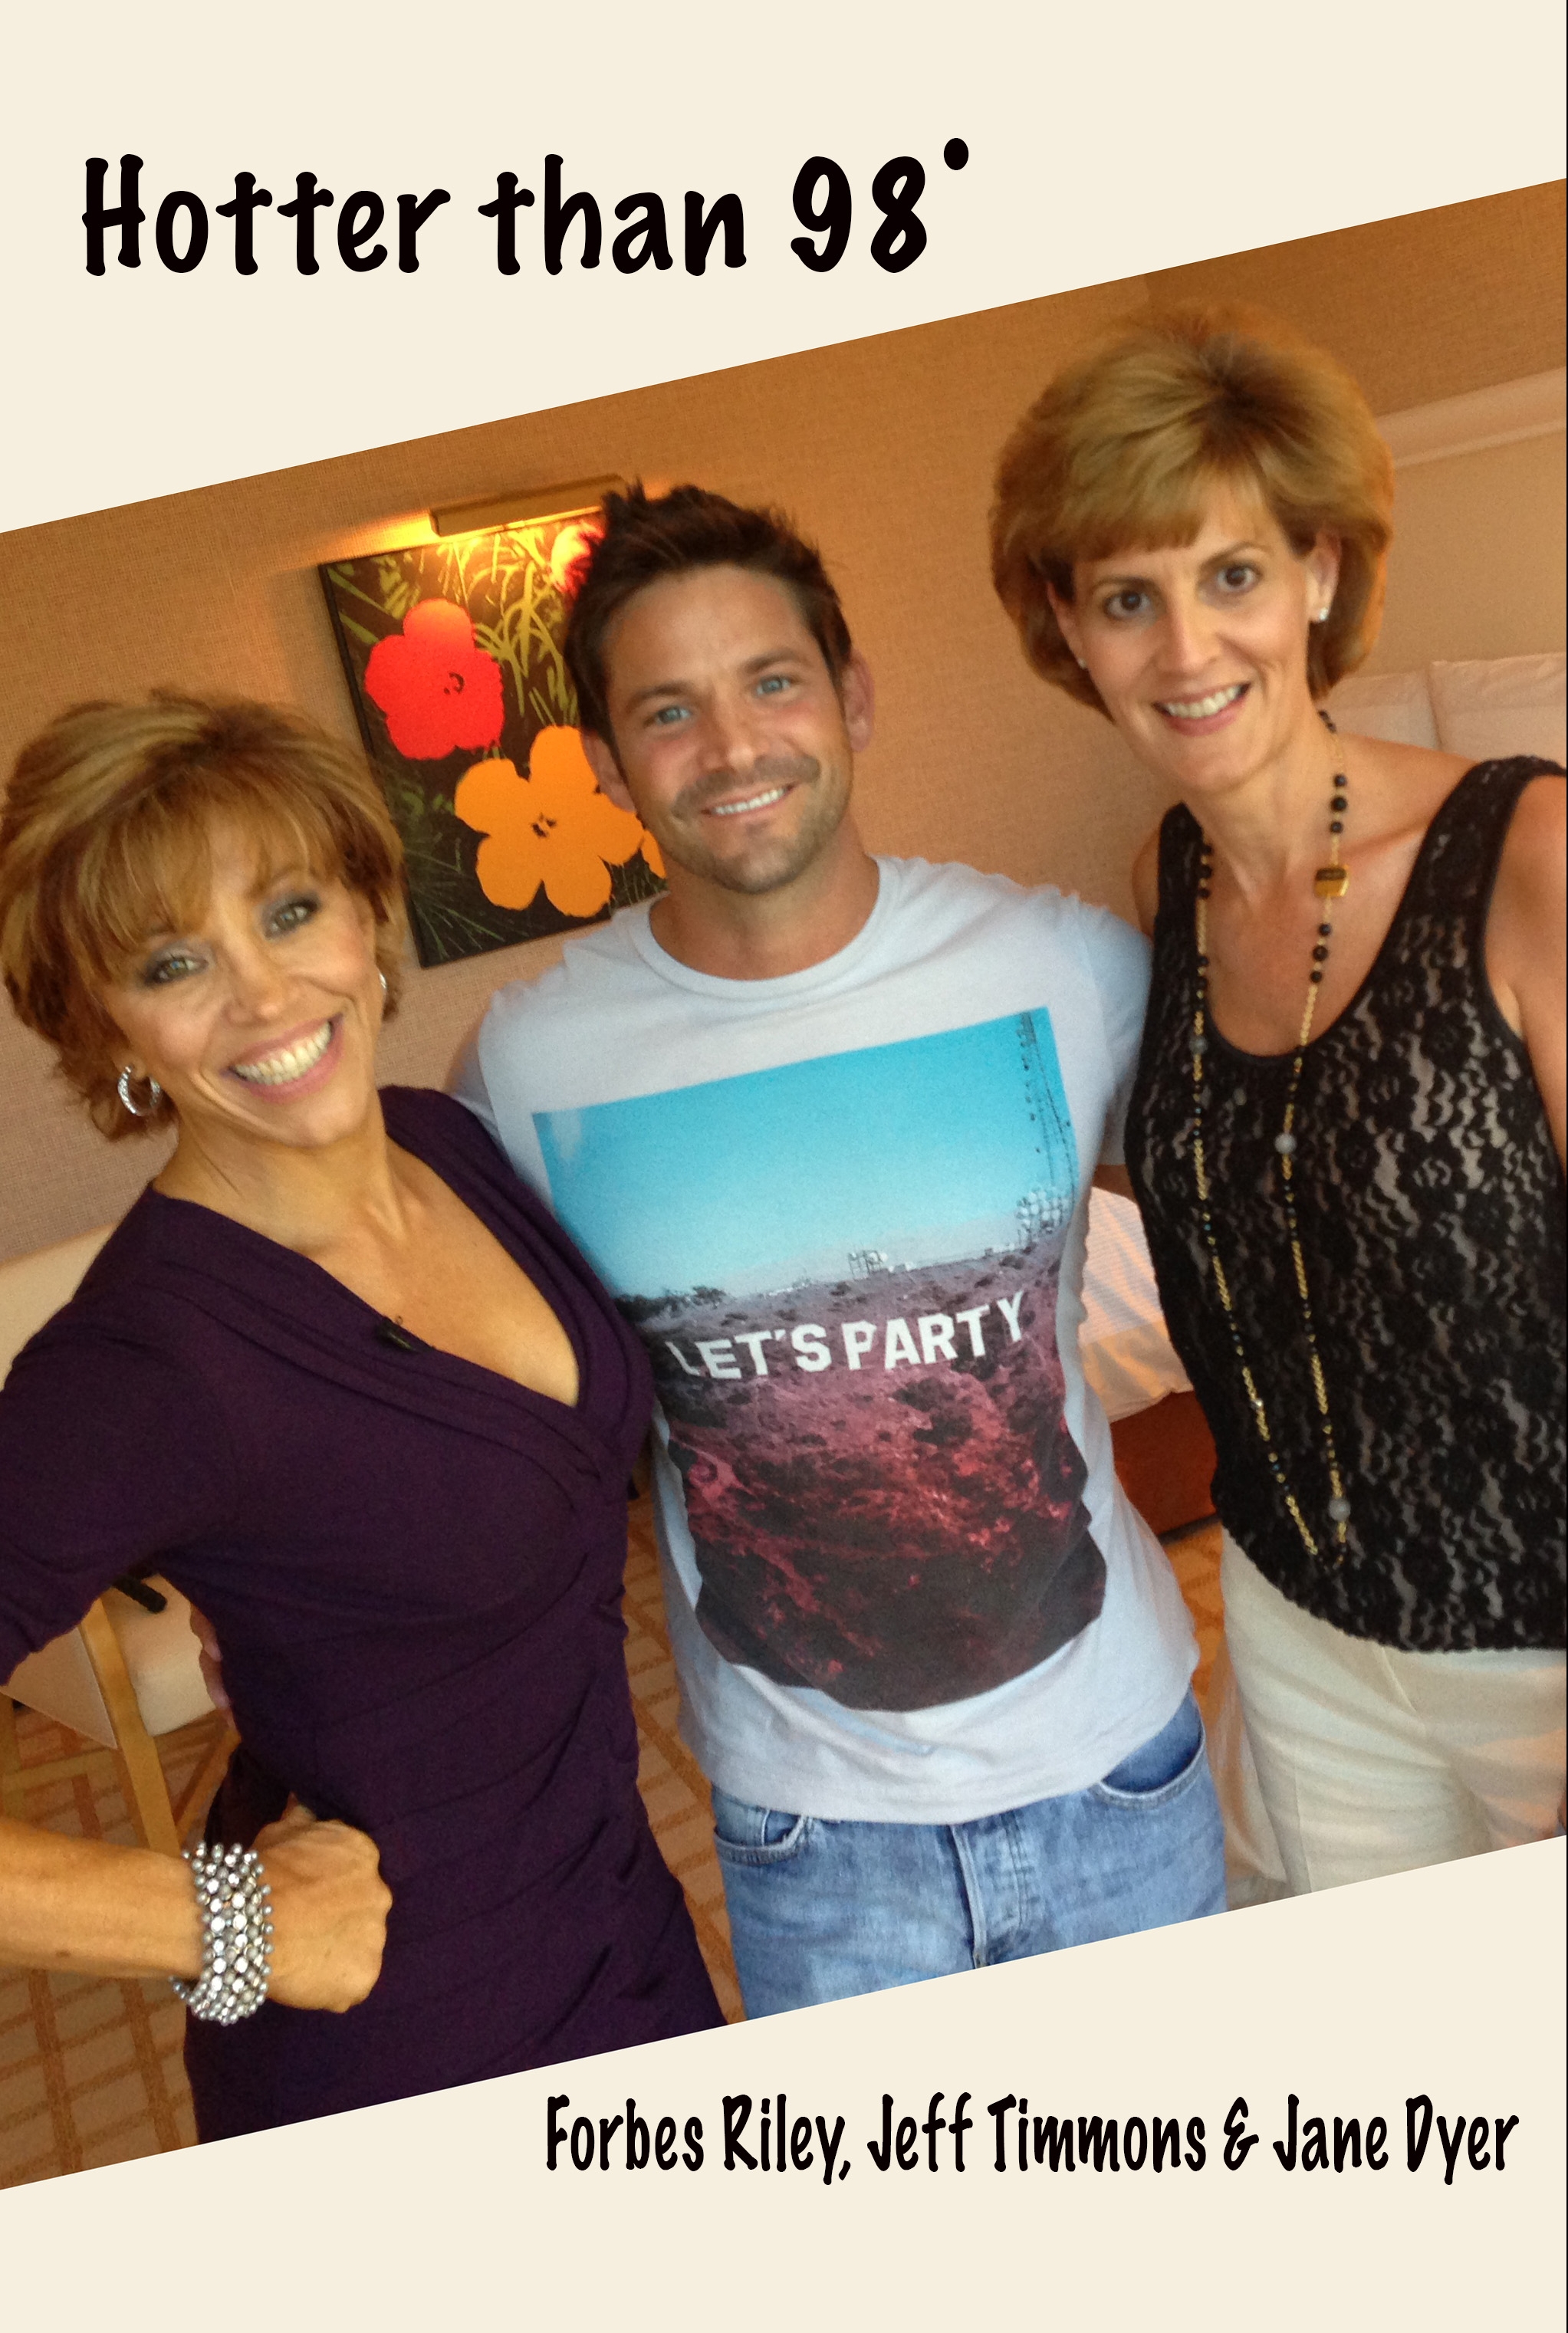 Forbes, Jeff Timmons, Jane Dyer